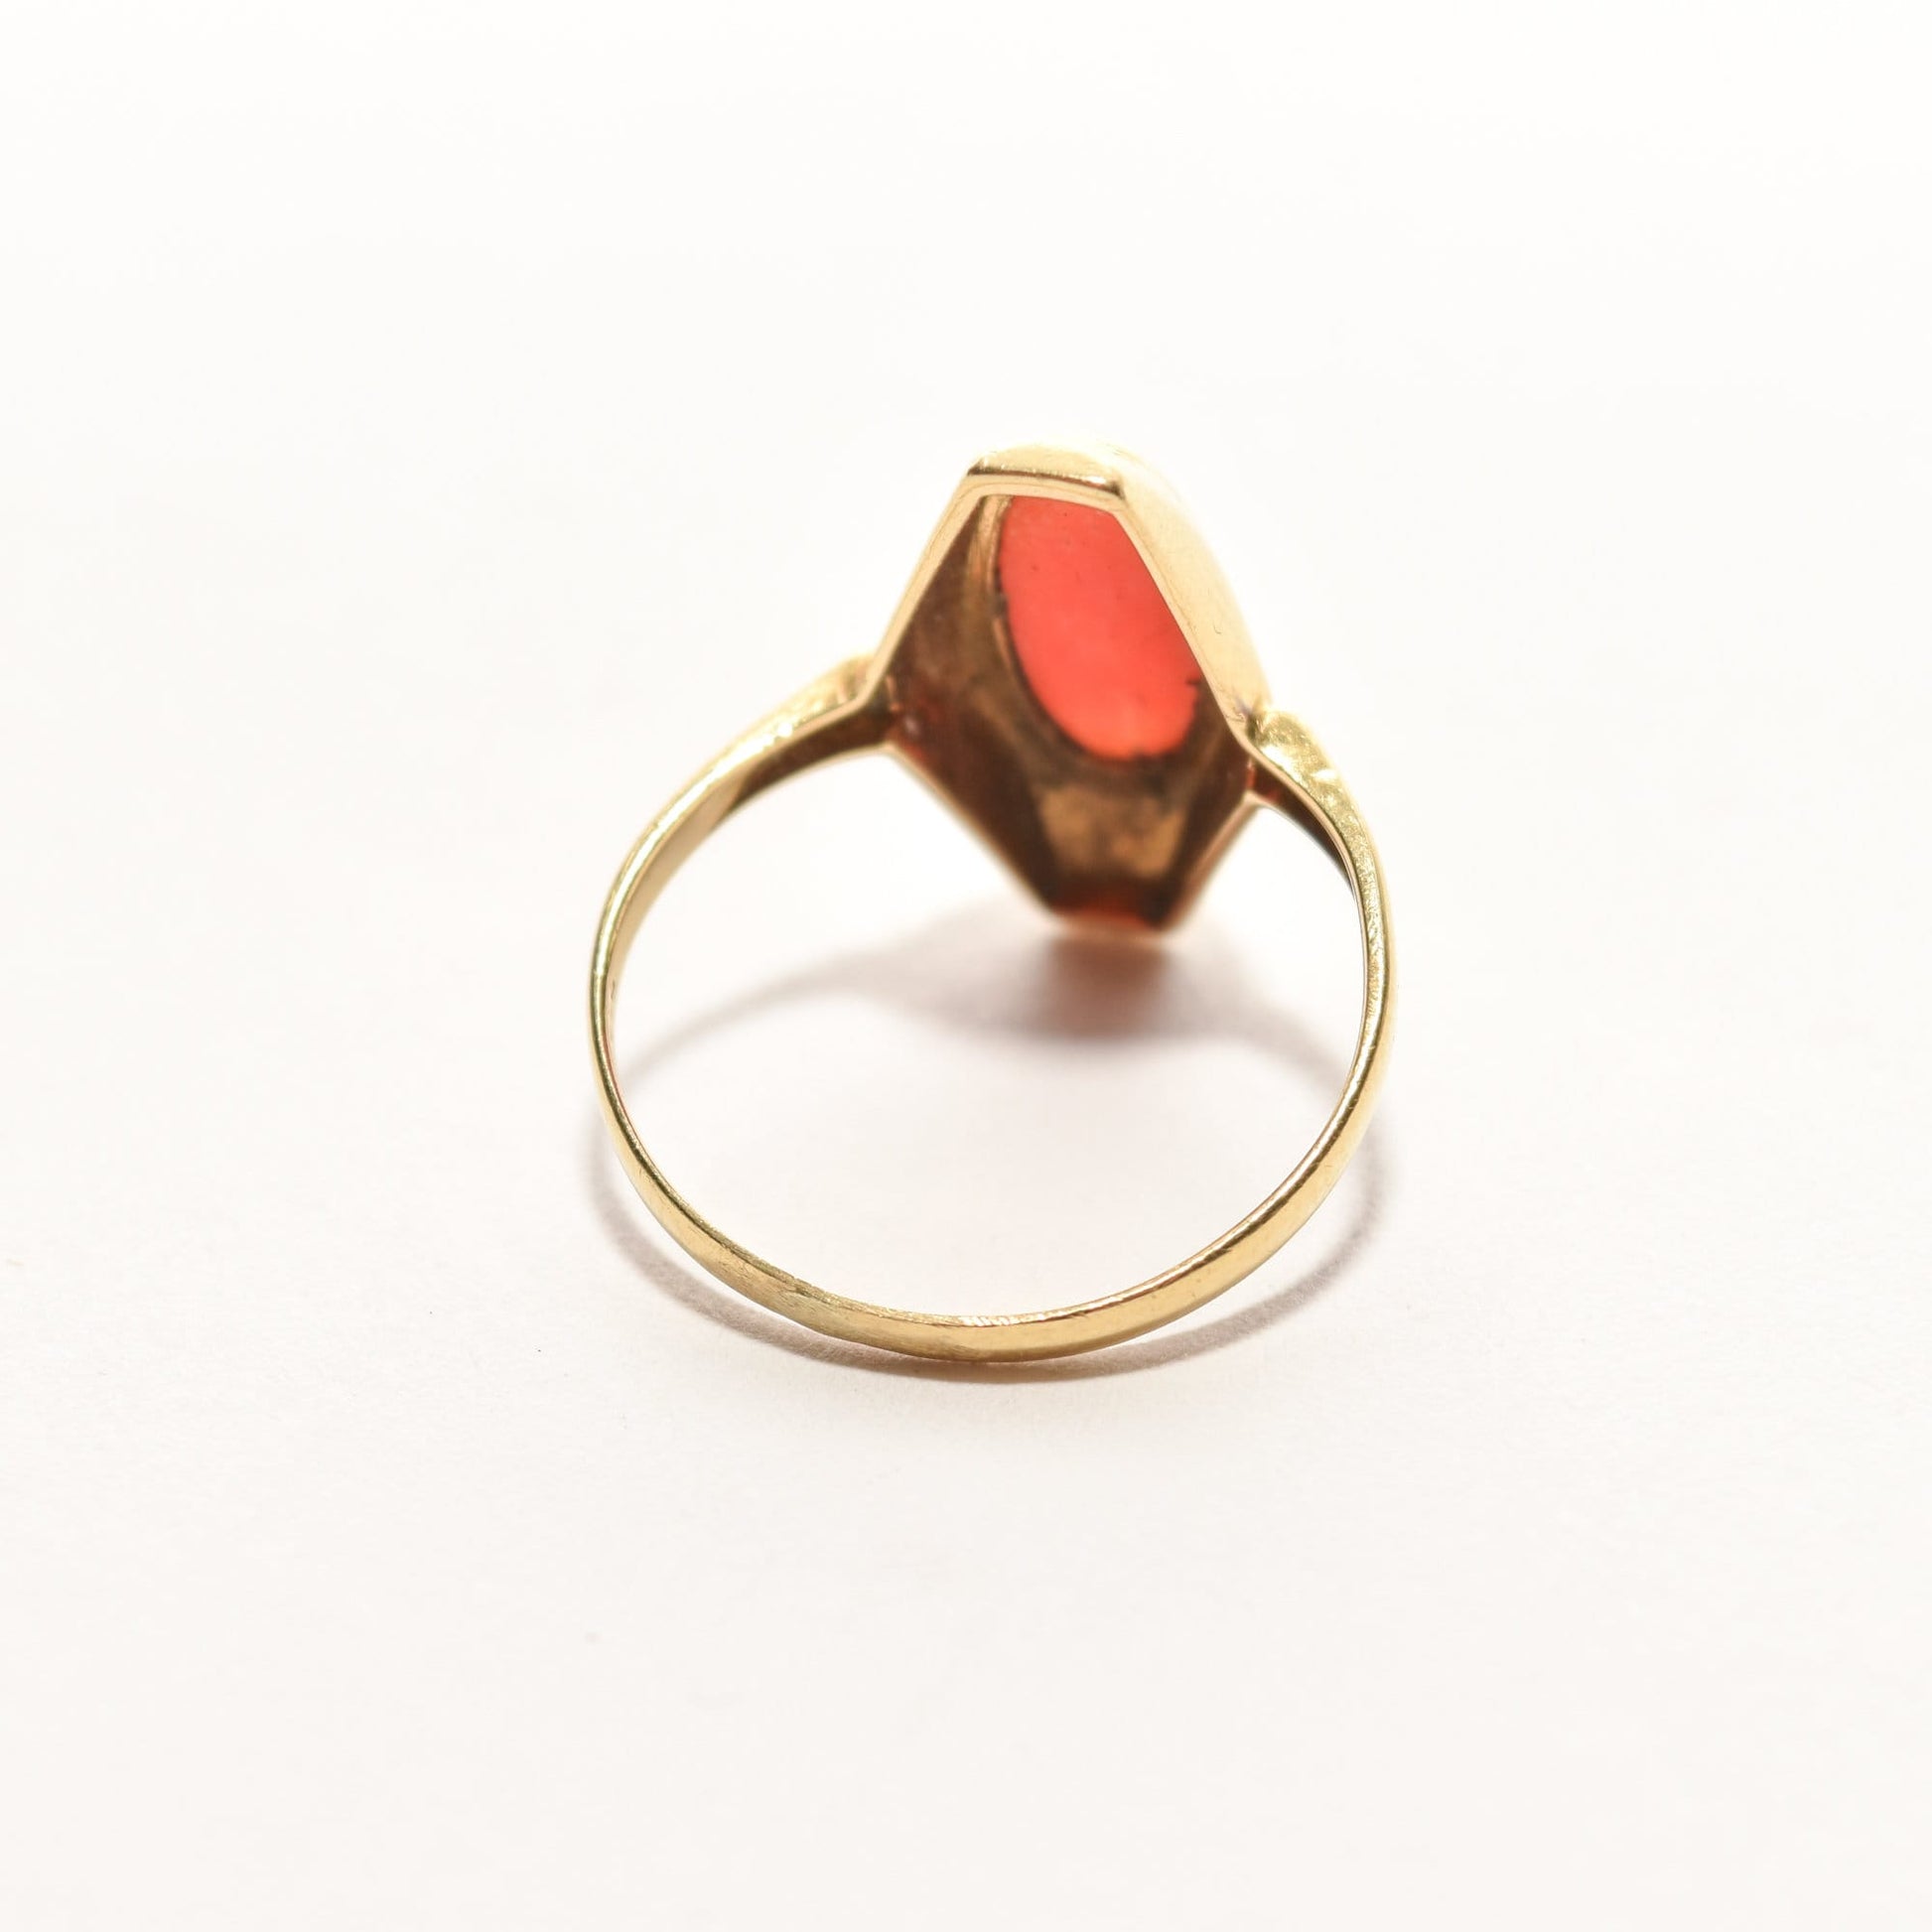 Estate 18K coral marquise ring displayed on a white background, featuring a yellow gold band with a red coral inset, size 5.25 US.